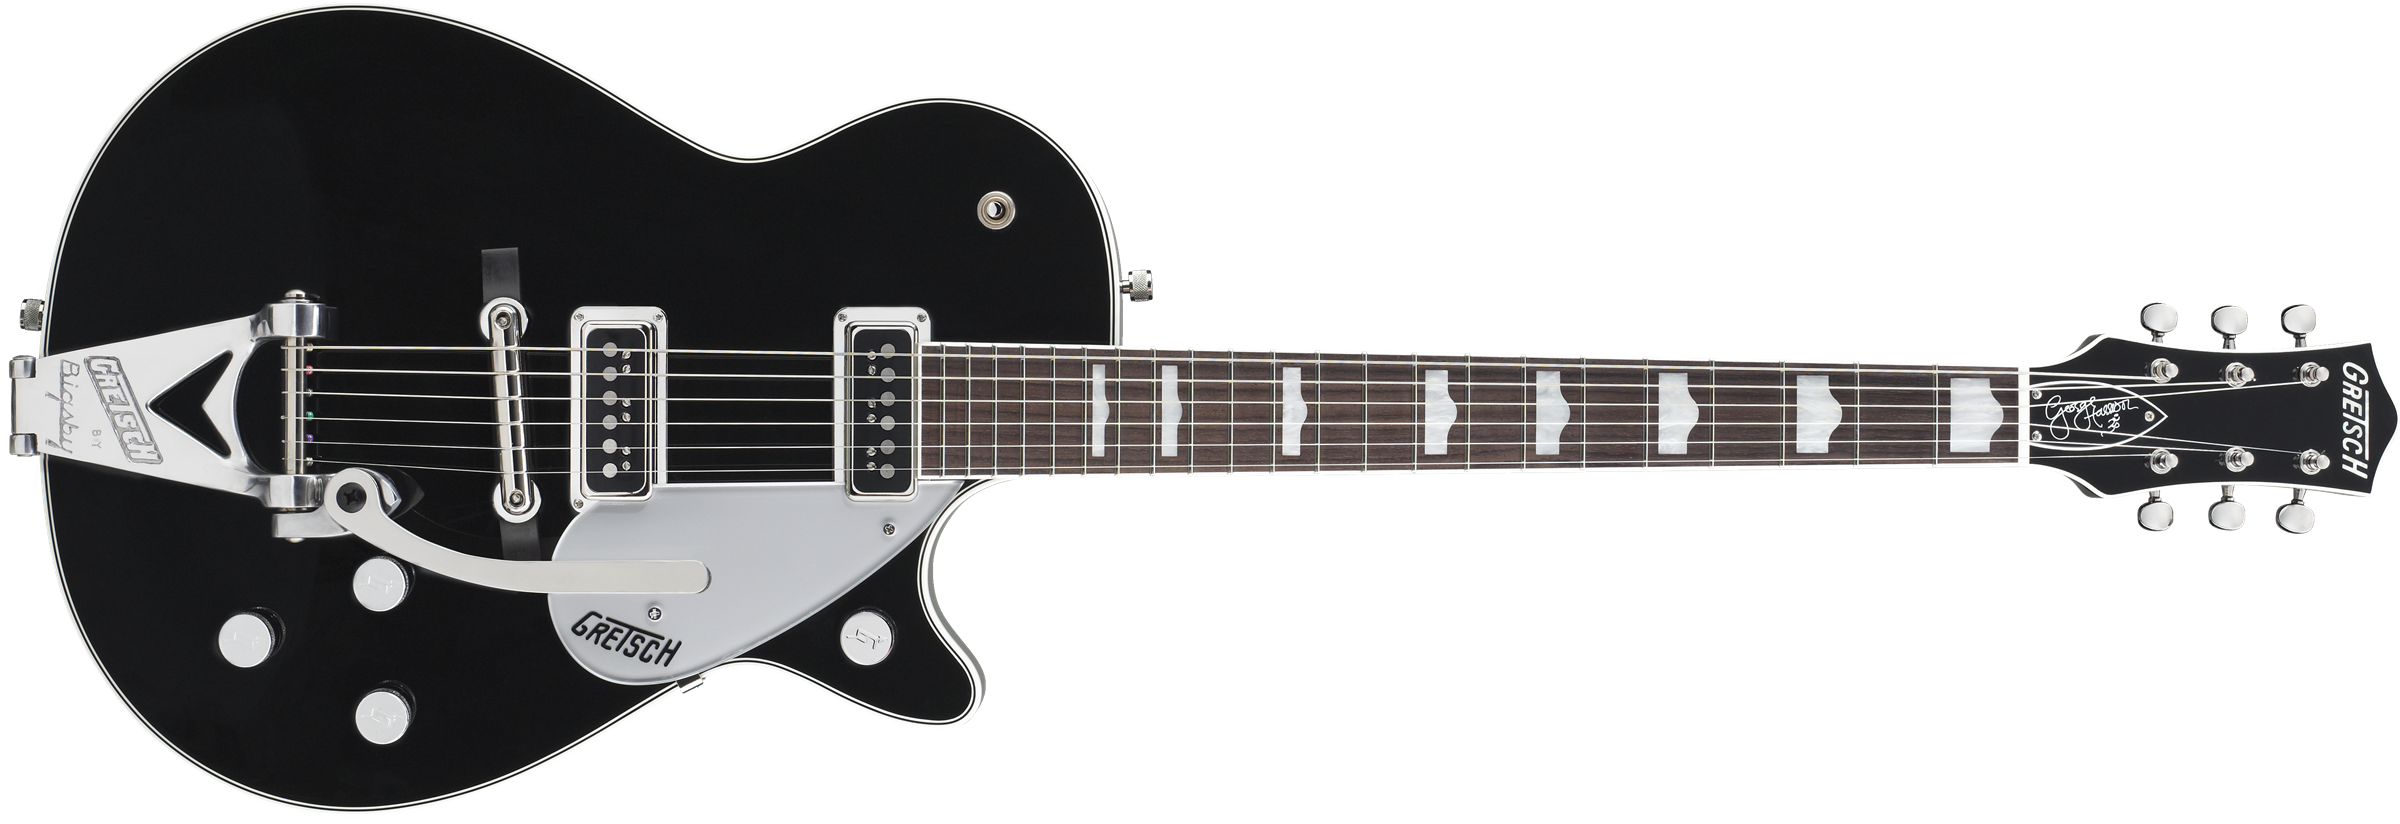 Gretsch G6128T-GH George Harrison Signature Duo Jet with Bigsby, Rosewood Fingerboard, Black 2400416806